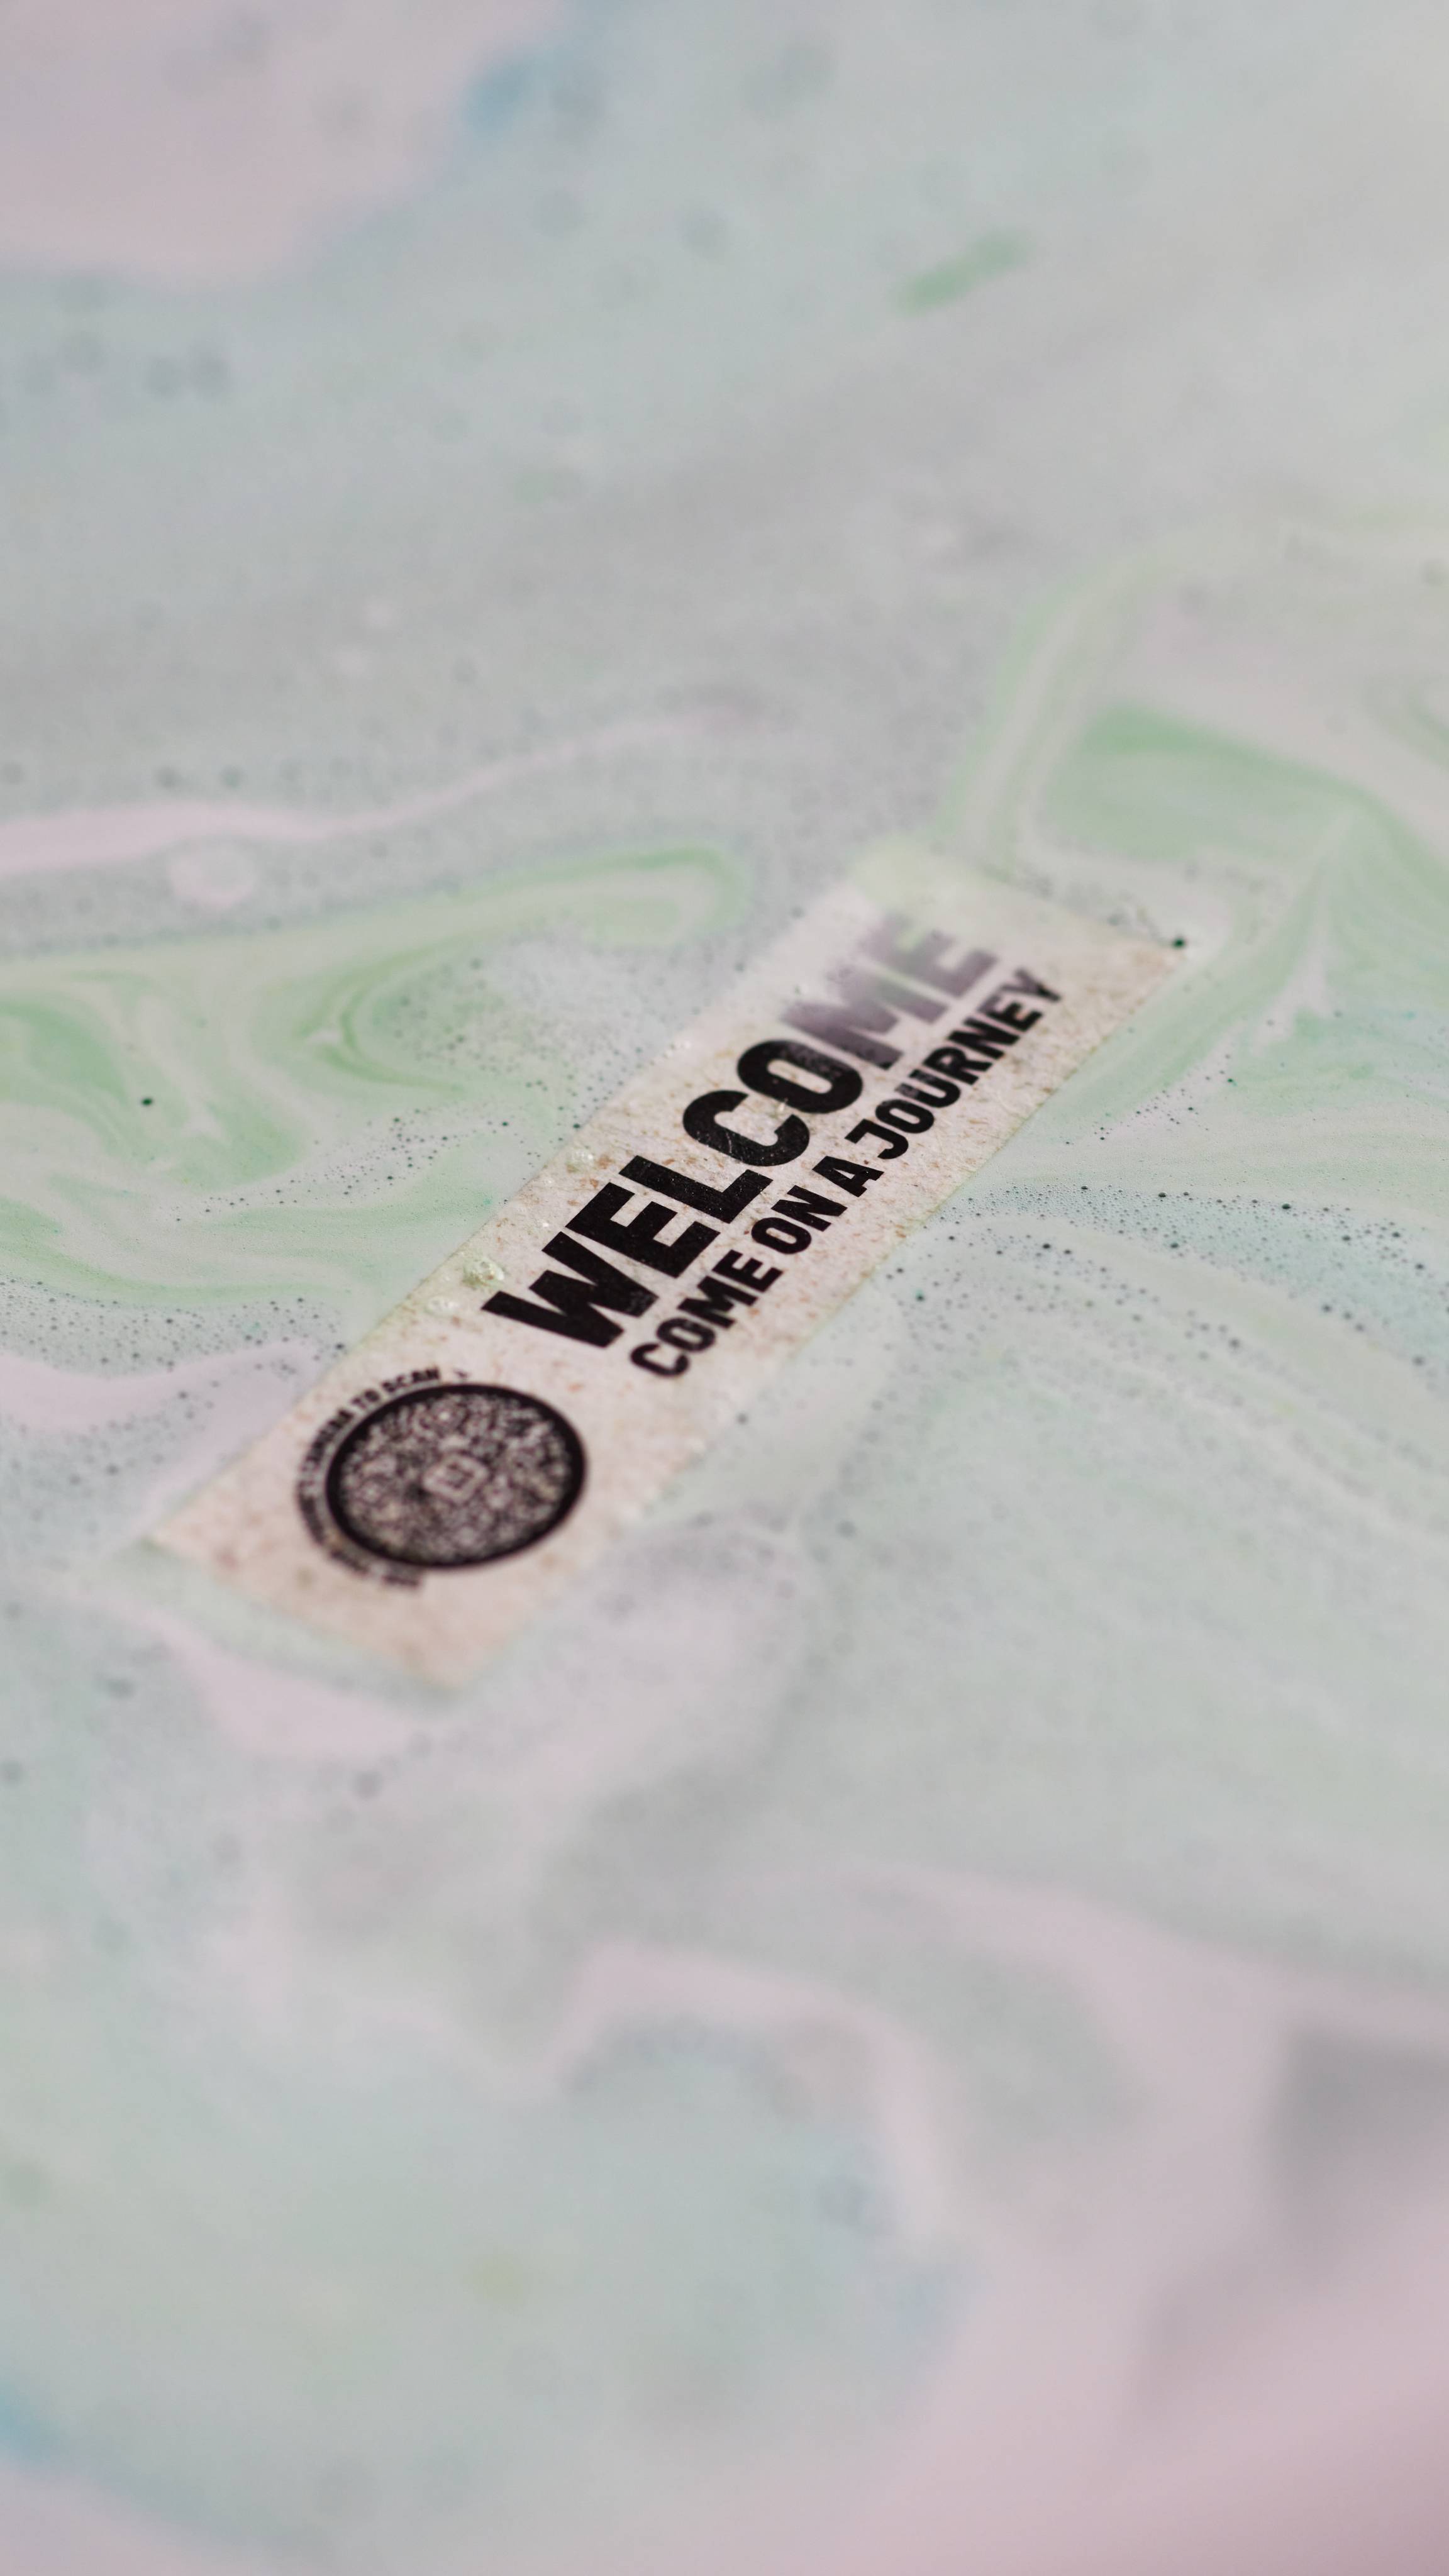 Welcome bath bomb melts leaving a small rice paper note with "Welcome - come on a journey" printed with a scannable QR code.